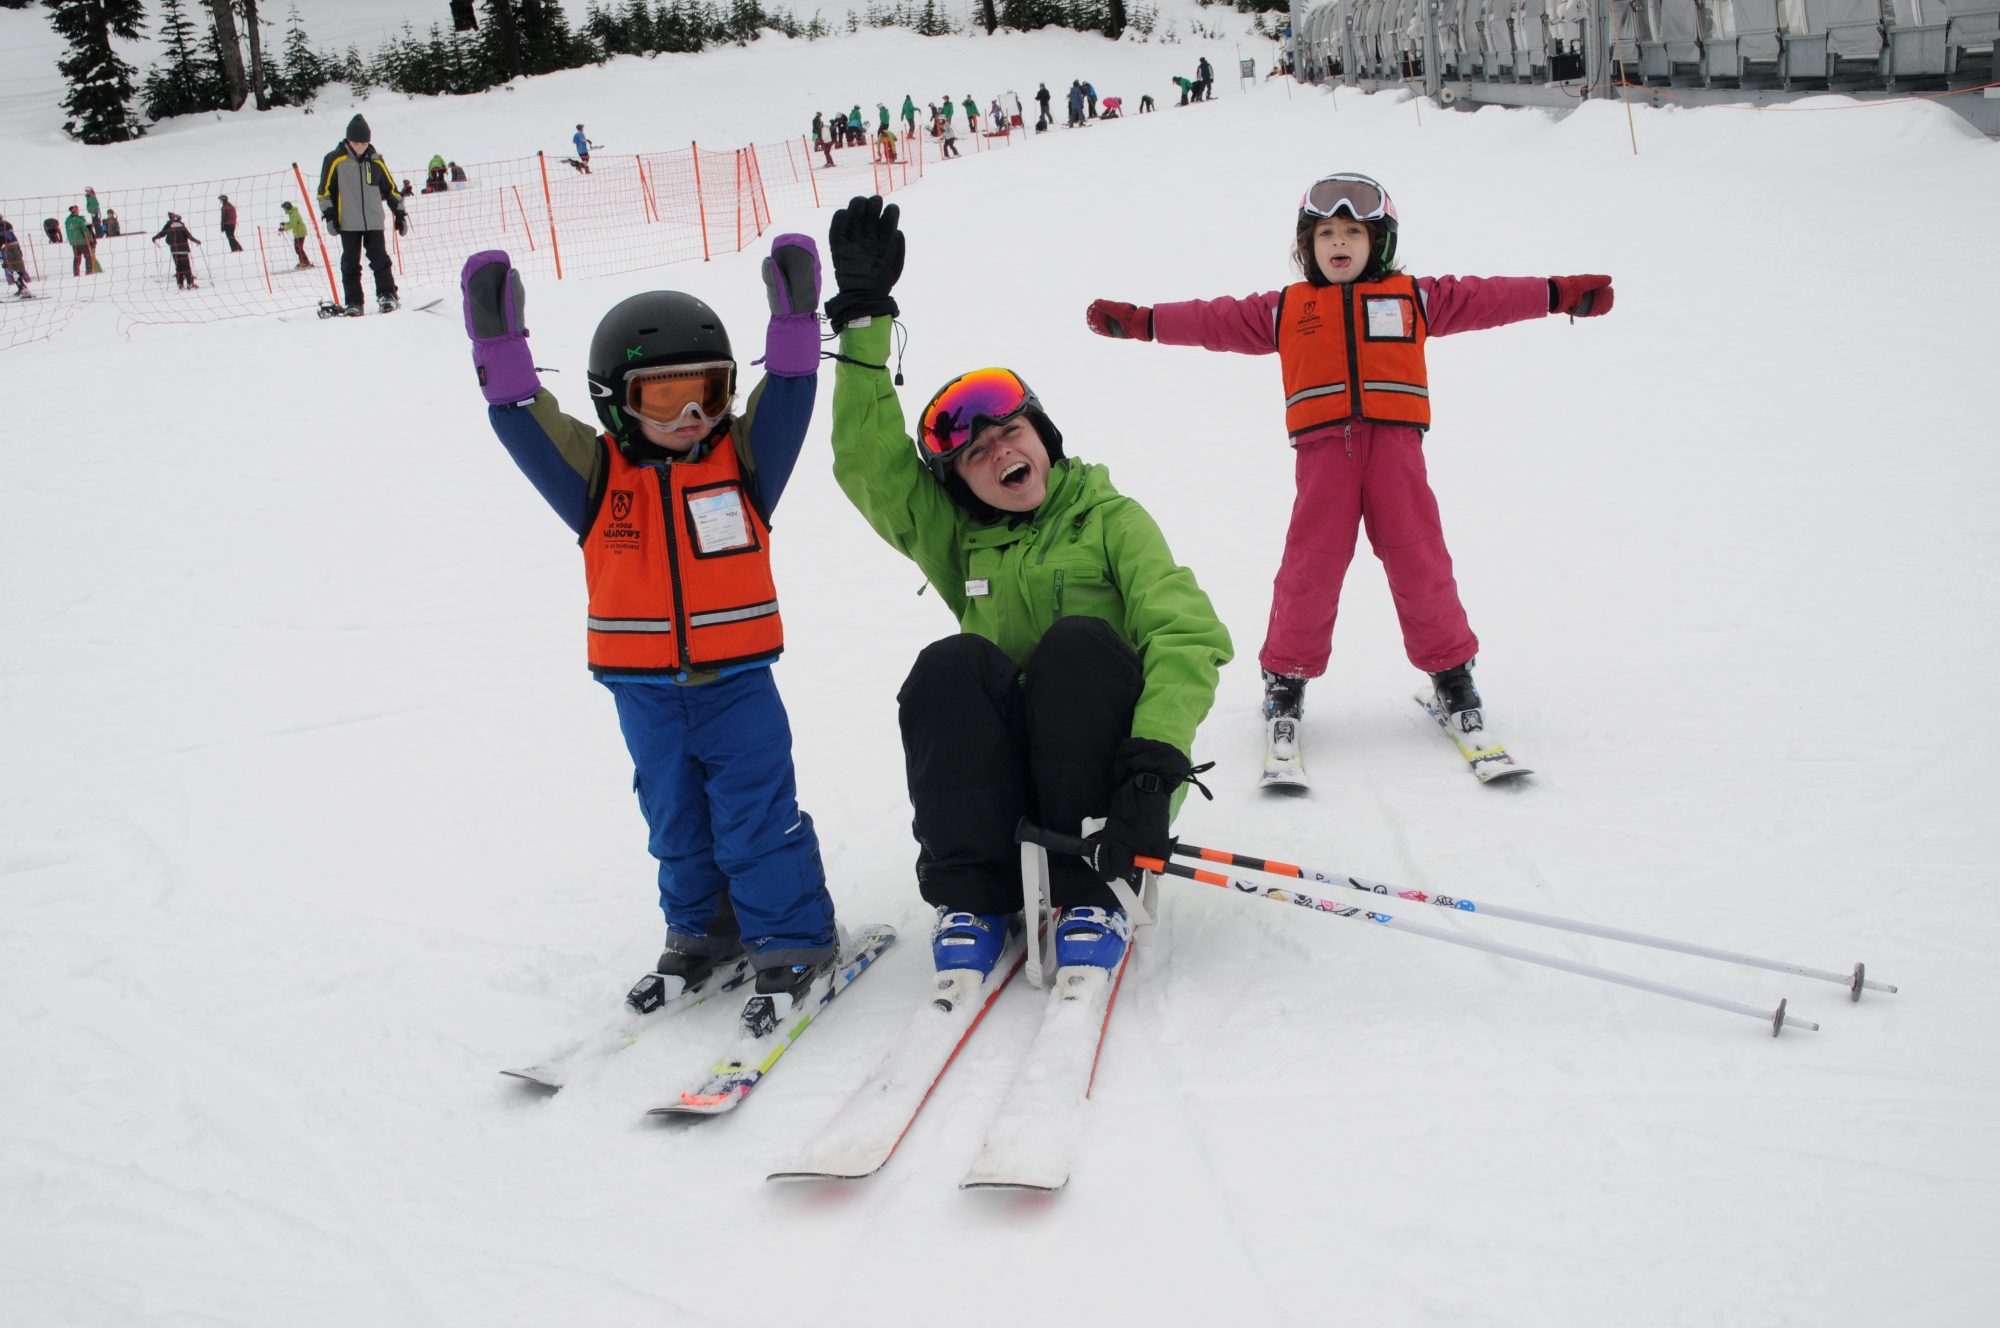 Mt Hood Meadows. Learn to Ski and Snowboard. First National Learn to Ski and Snowboard Day in the US.